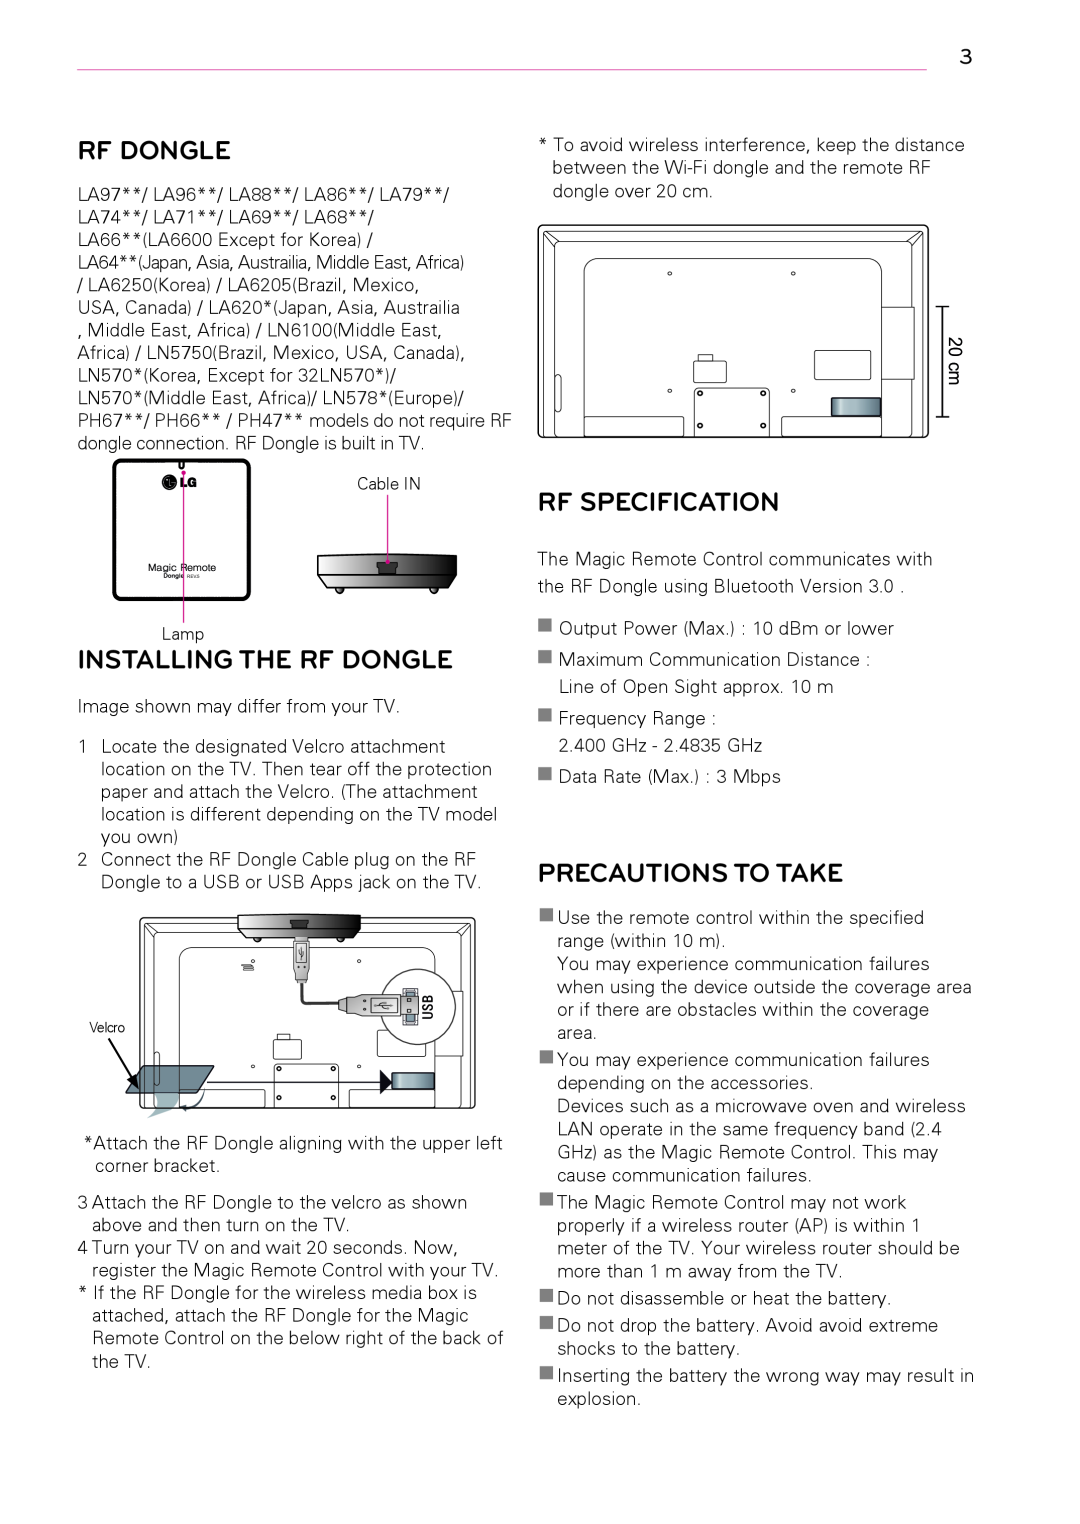 LG Electronics AN-MR400 owner manual Installing The Rf Dongle, Rf Specification, Precautions To Take 